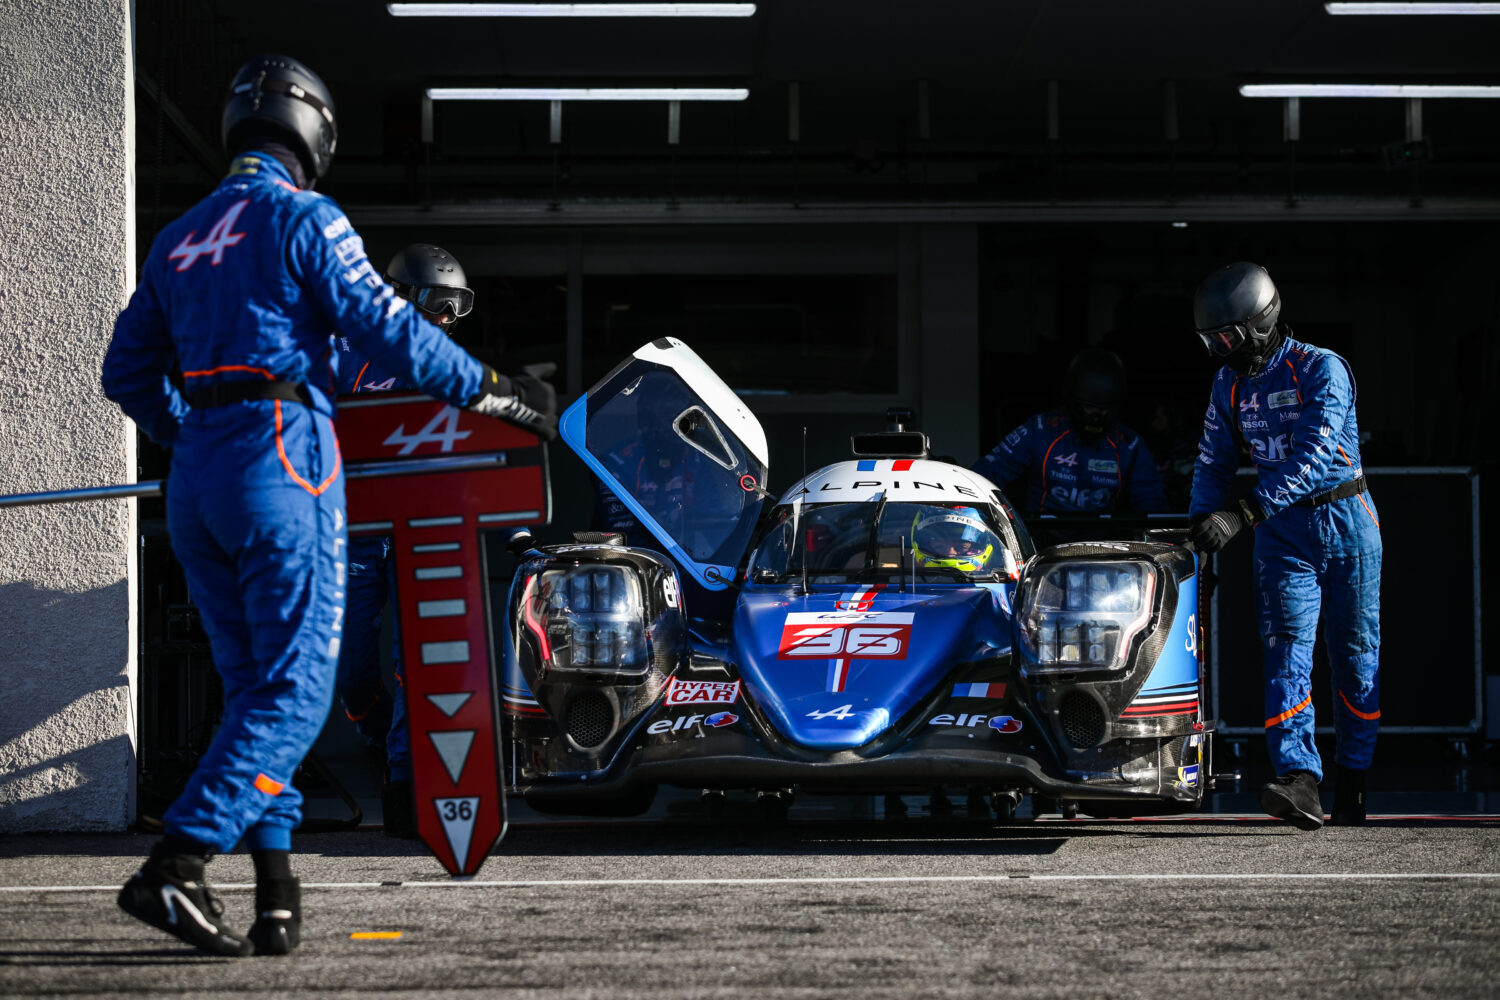 12-2022 - Alpine A480 - Tests Sessions on the Castellet circuit – Alpine A480 N°36 Alpine Elf (Lapierre - Negrao - Vaxiviere).jpeg